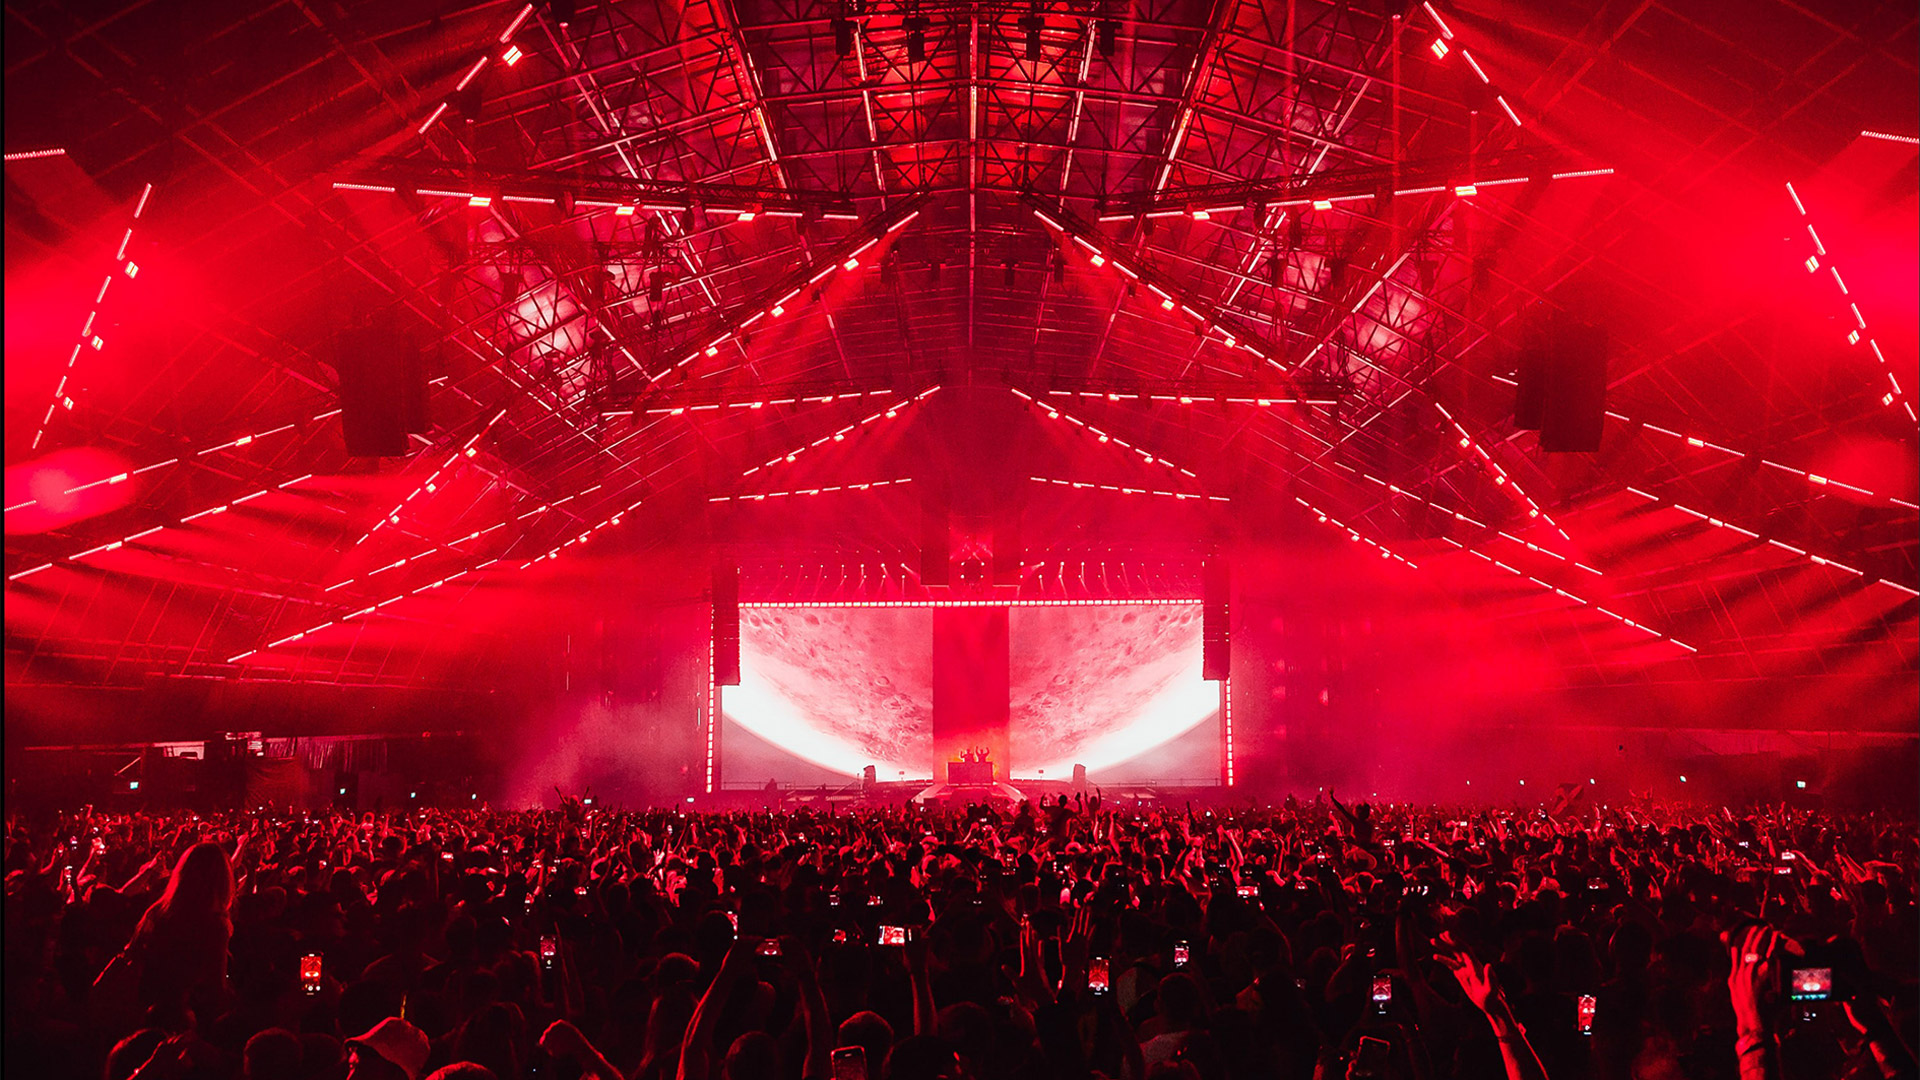 CamelPhat performing at the Steelyard at Creamfields